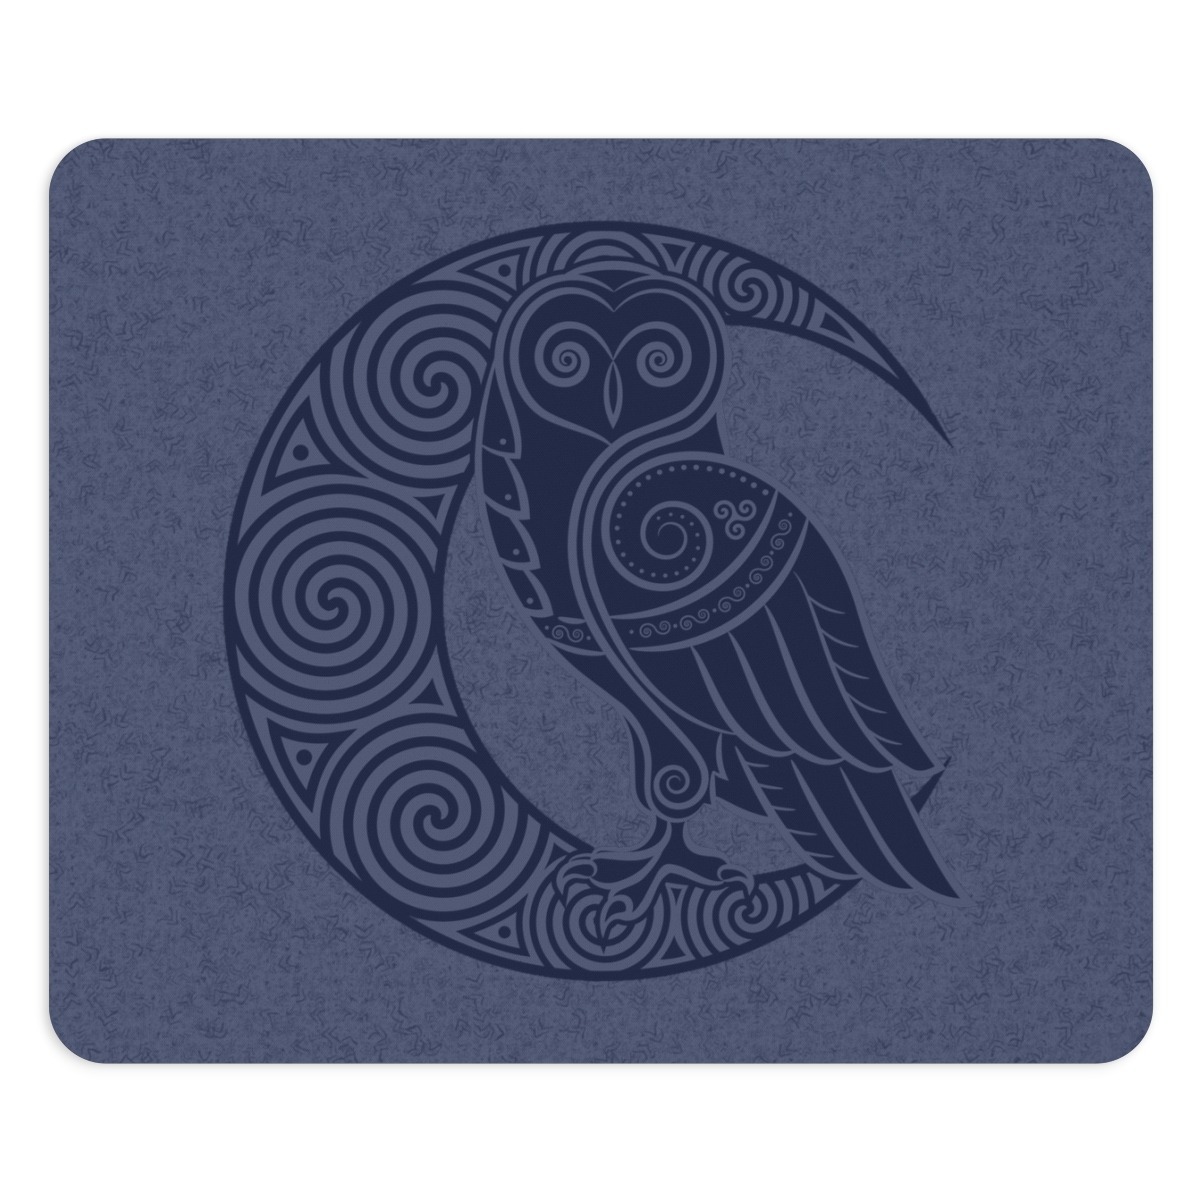 Blue Owl Crescent Moon Mouse Pad